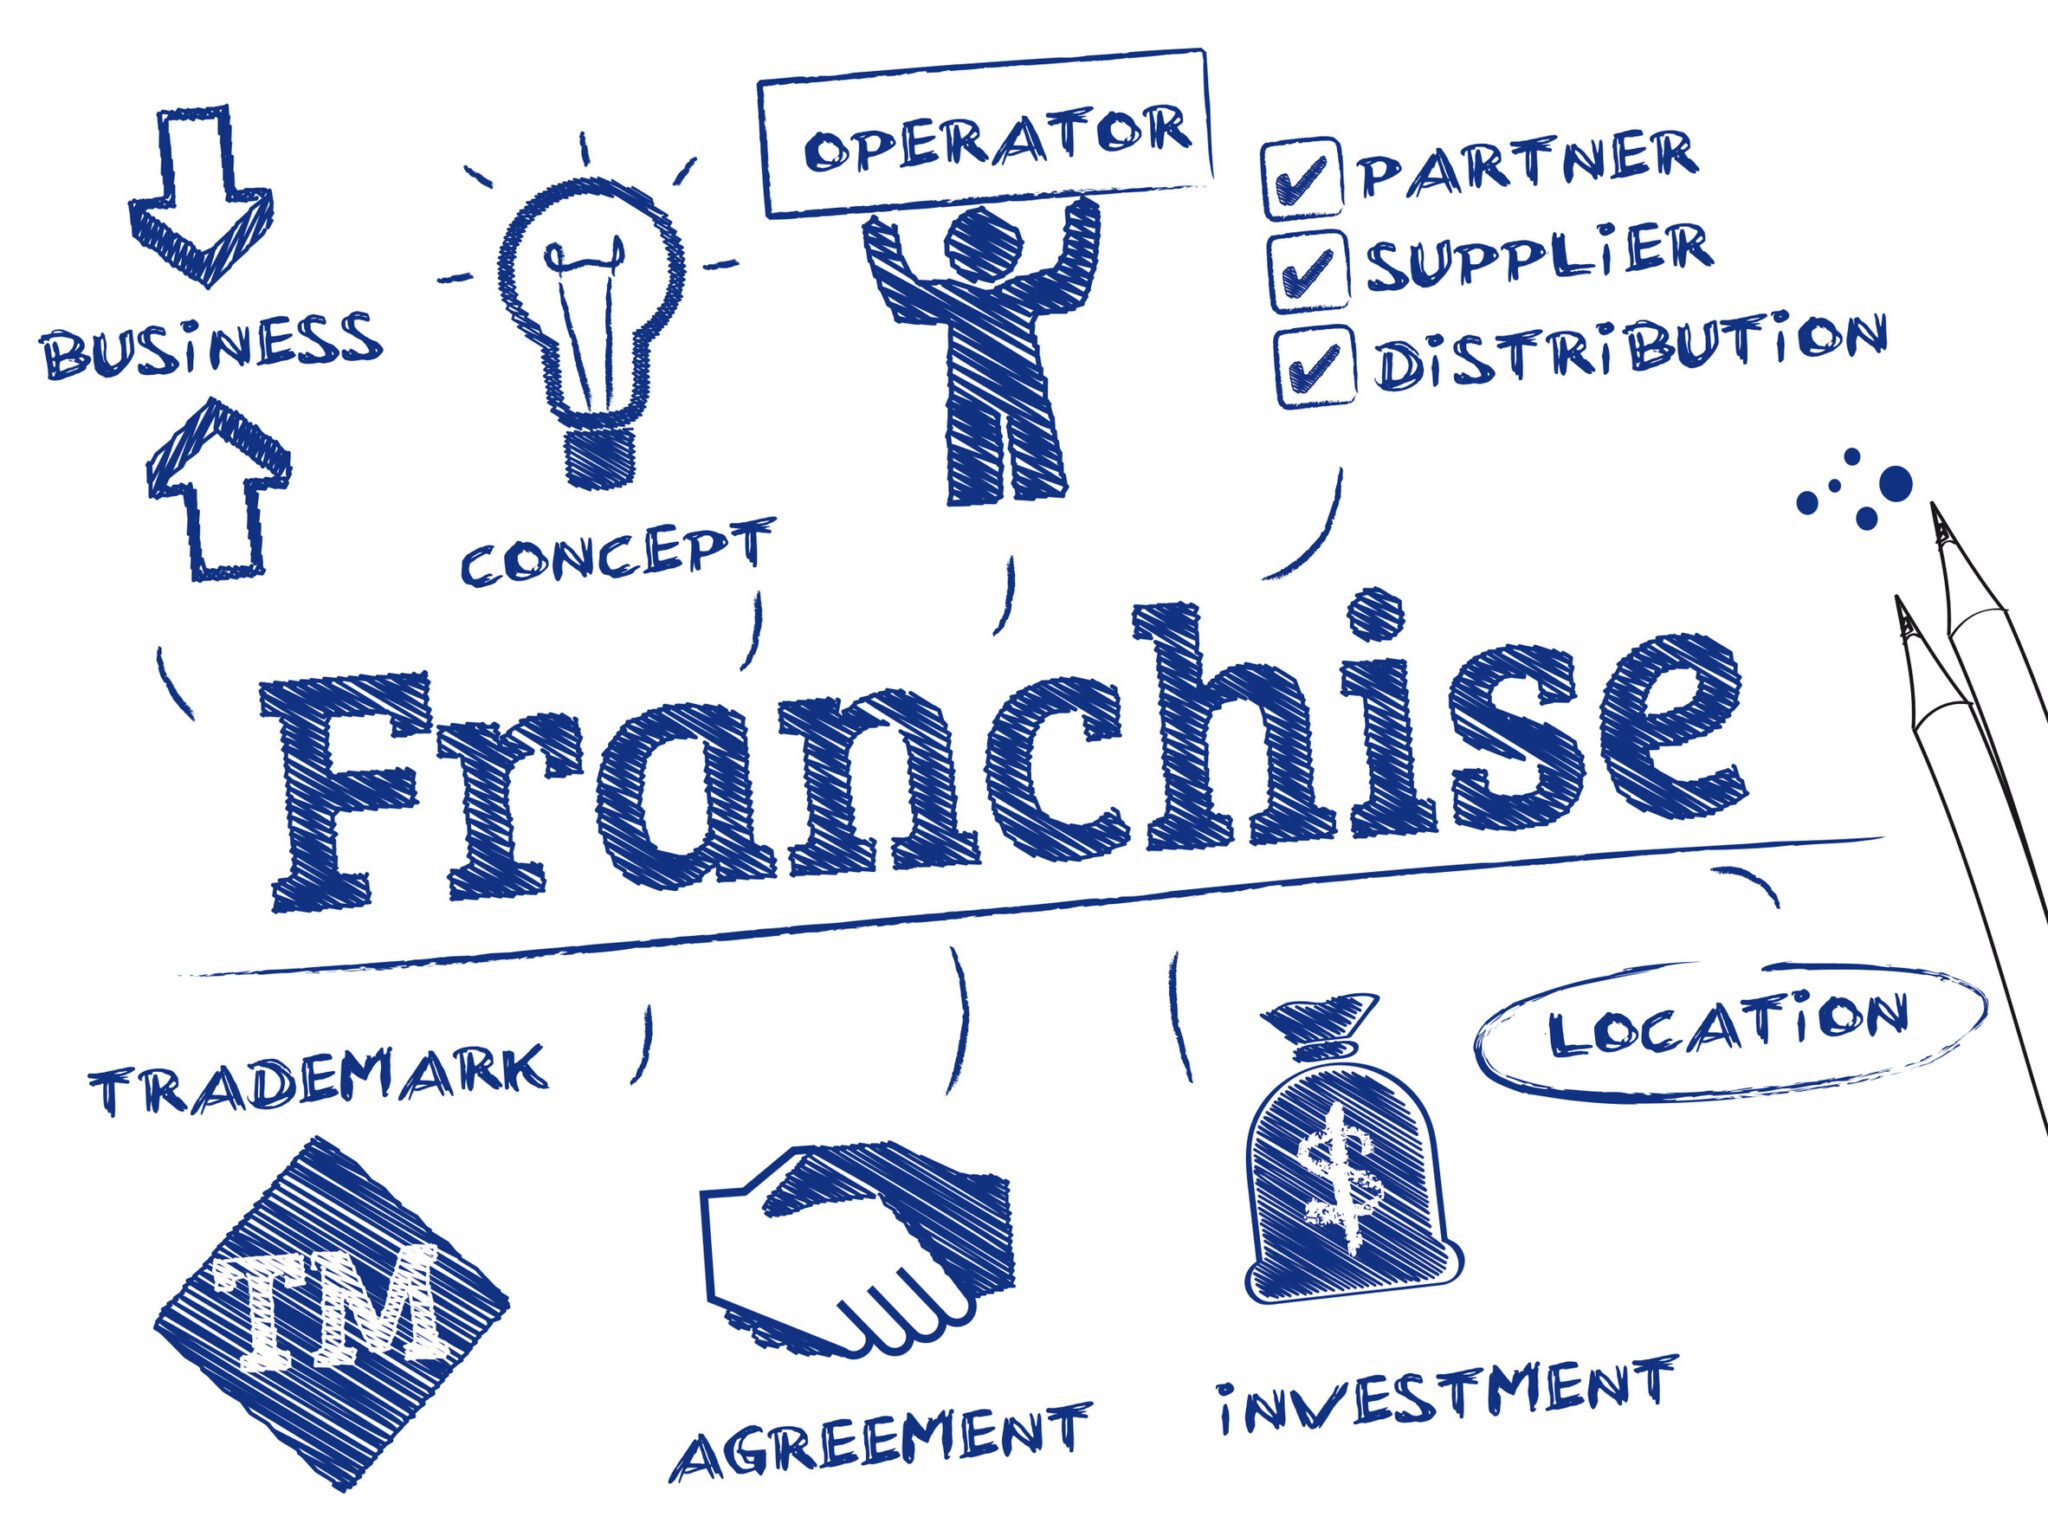 How to Choose, Buy, and Operate a Successful Franchise